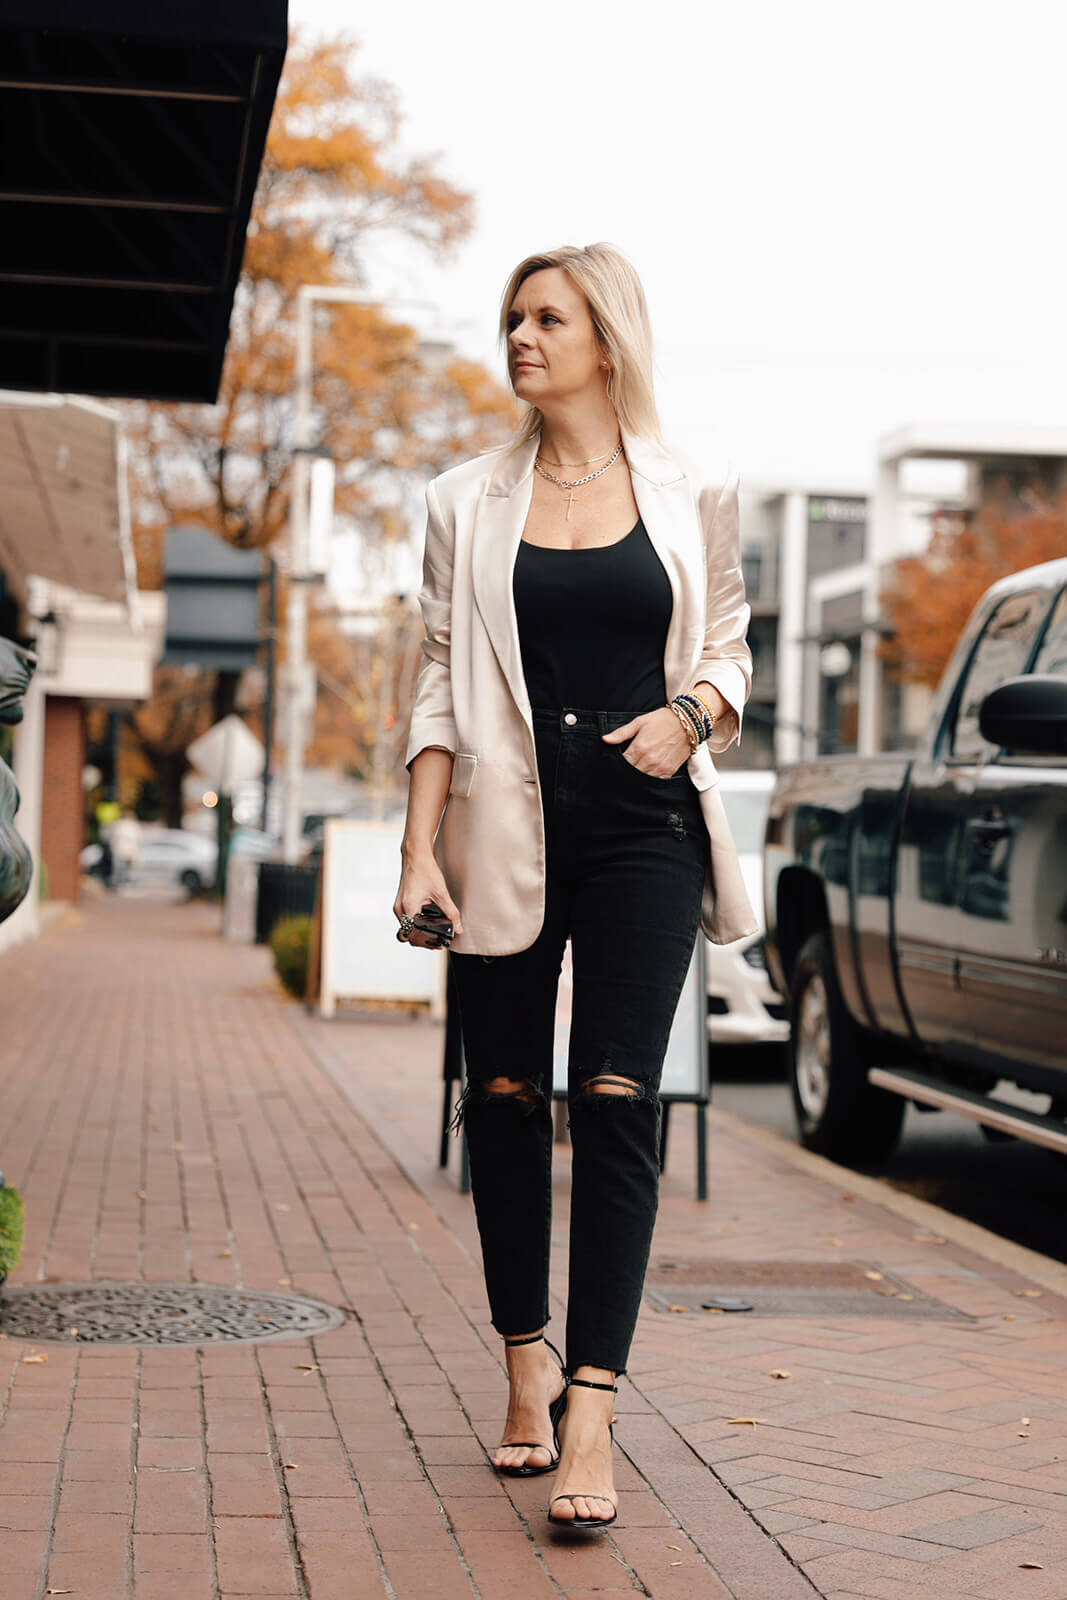 satin blazer & black jeans how to style a satin blazer how to wear a colored blazer over all black personal stylists share Christmas party style inspiration nashville stylists share Christmas party looks how to wear a satin blazer for a party how to style a satin blazer for a party